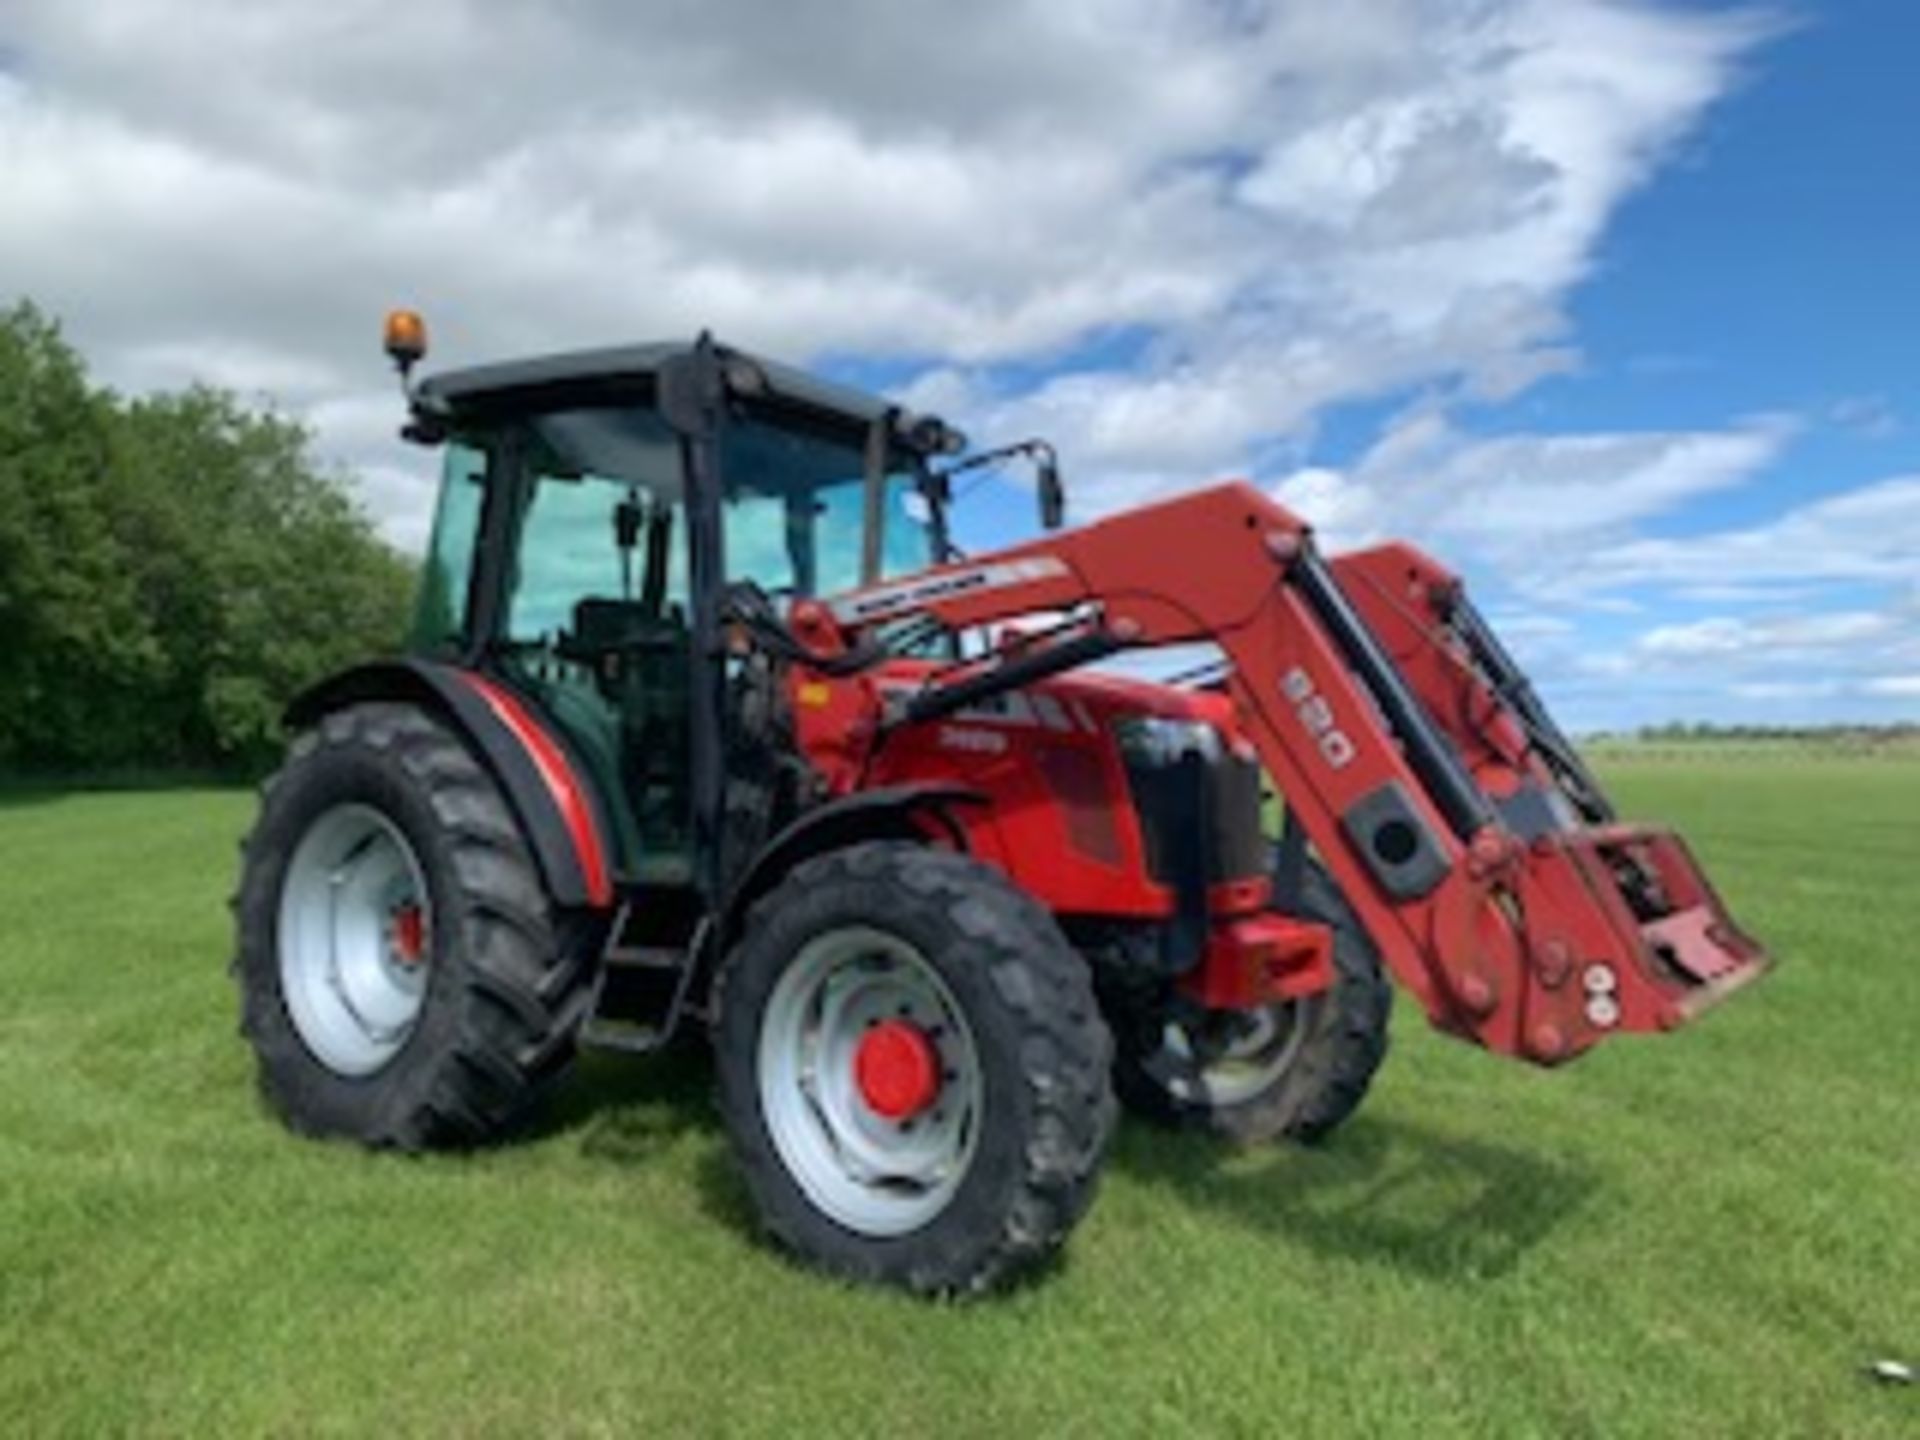 2008 Massey Ferguson 3625 4WD Tractor c/w MF 920 loader only 549hrs (not verified) SN - T